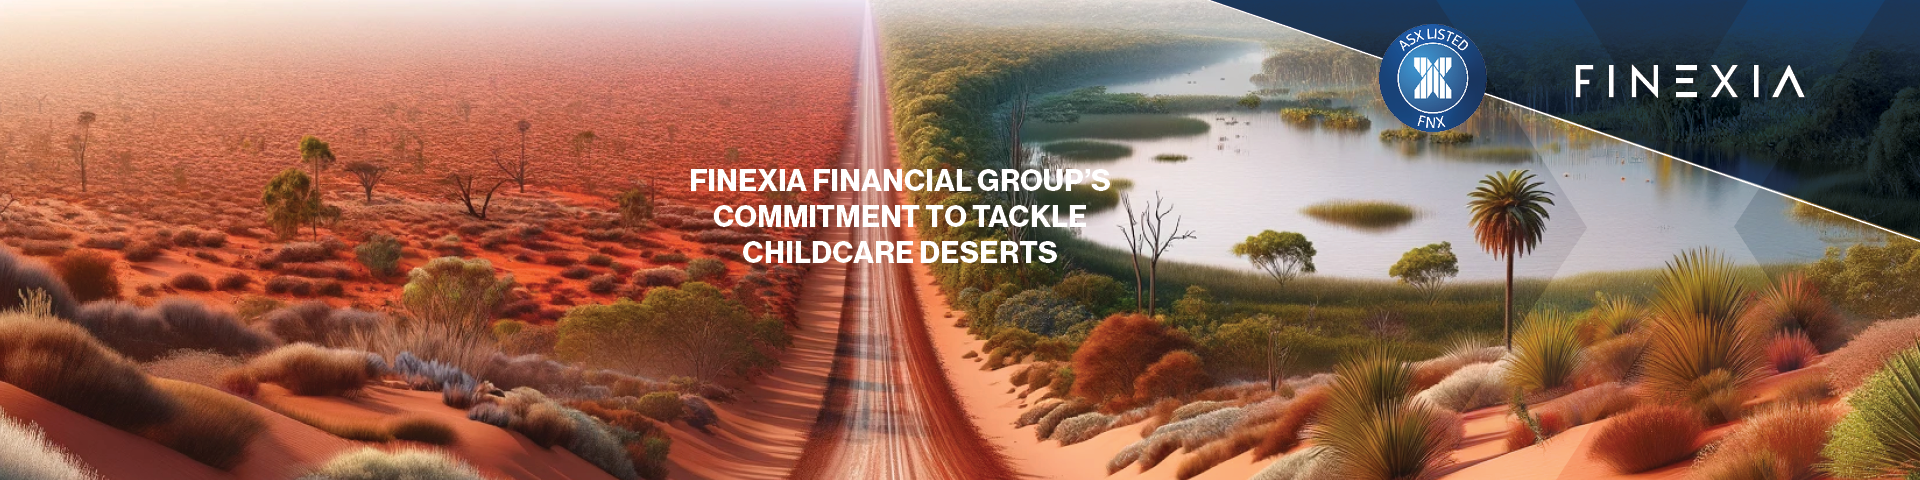 Finexia Financial Group's Commitment to Tackle Childcare Deserts